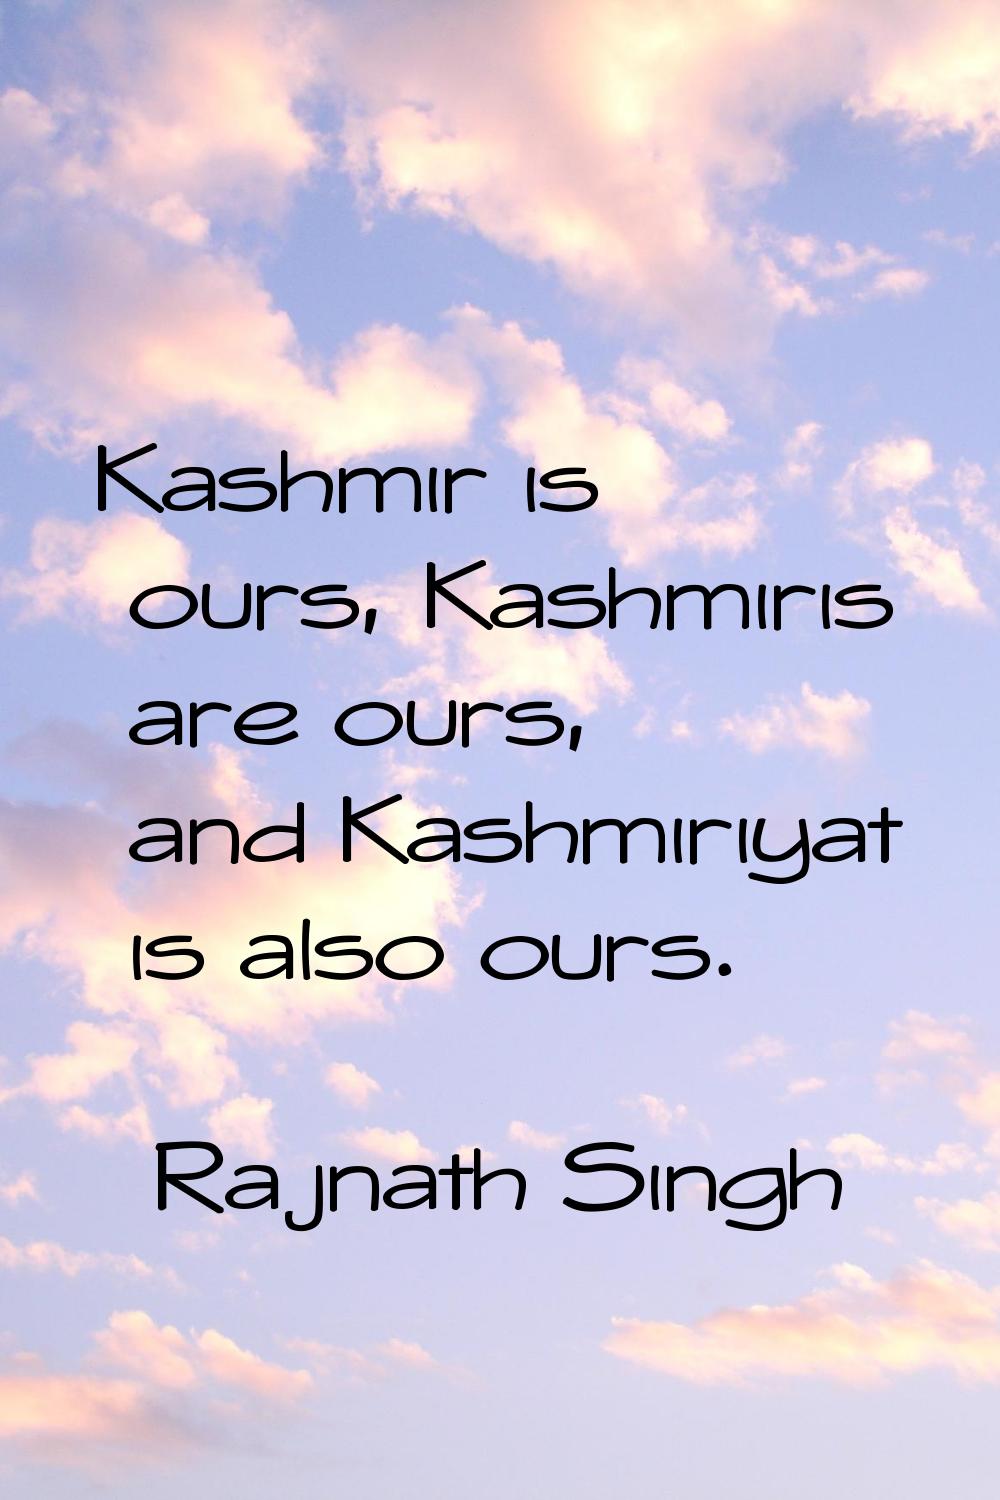 Kashmir is ours, Kashmiris are ours, and Kashmiriyat is also ours.